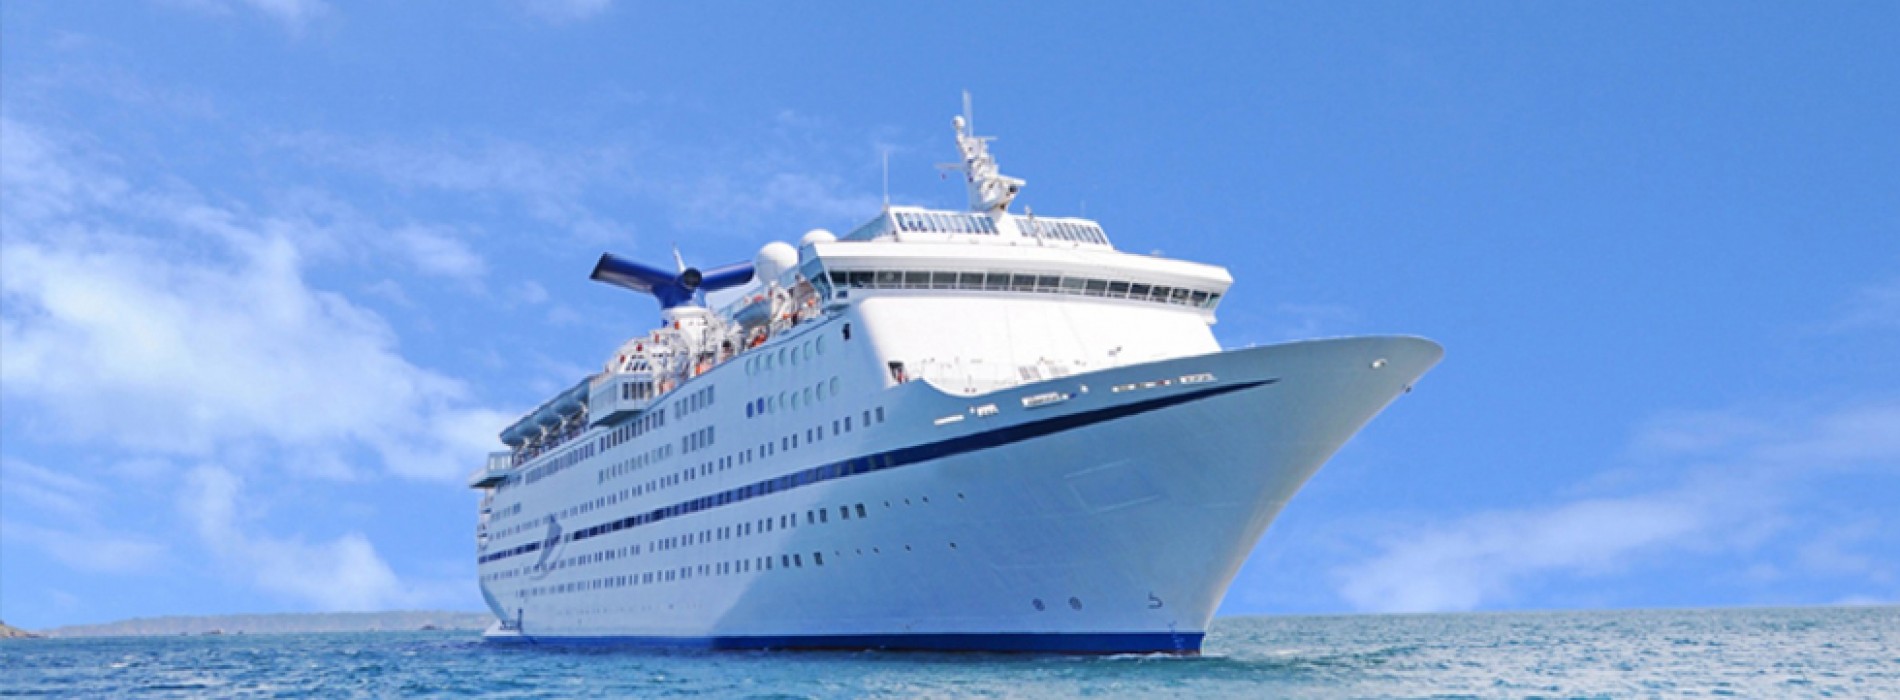 Cruise terminal in Chennai to be ready in a month